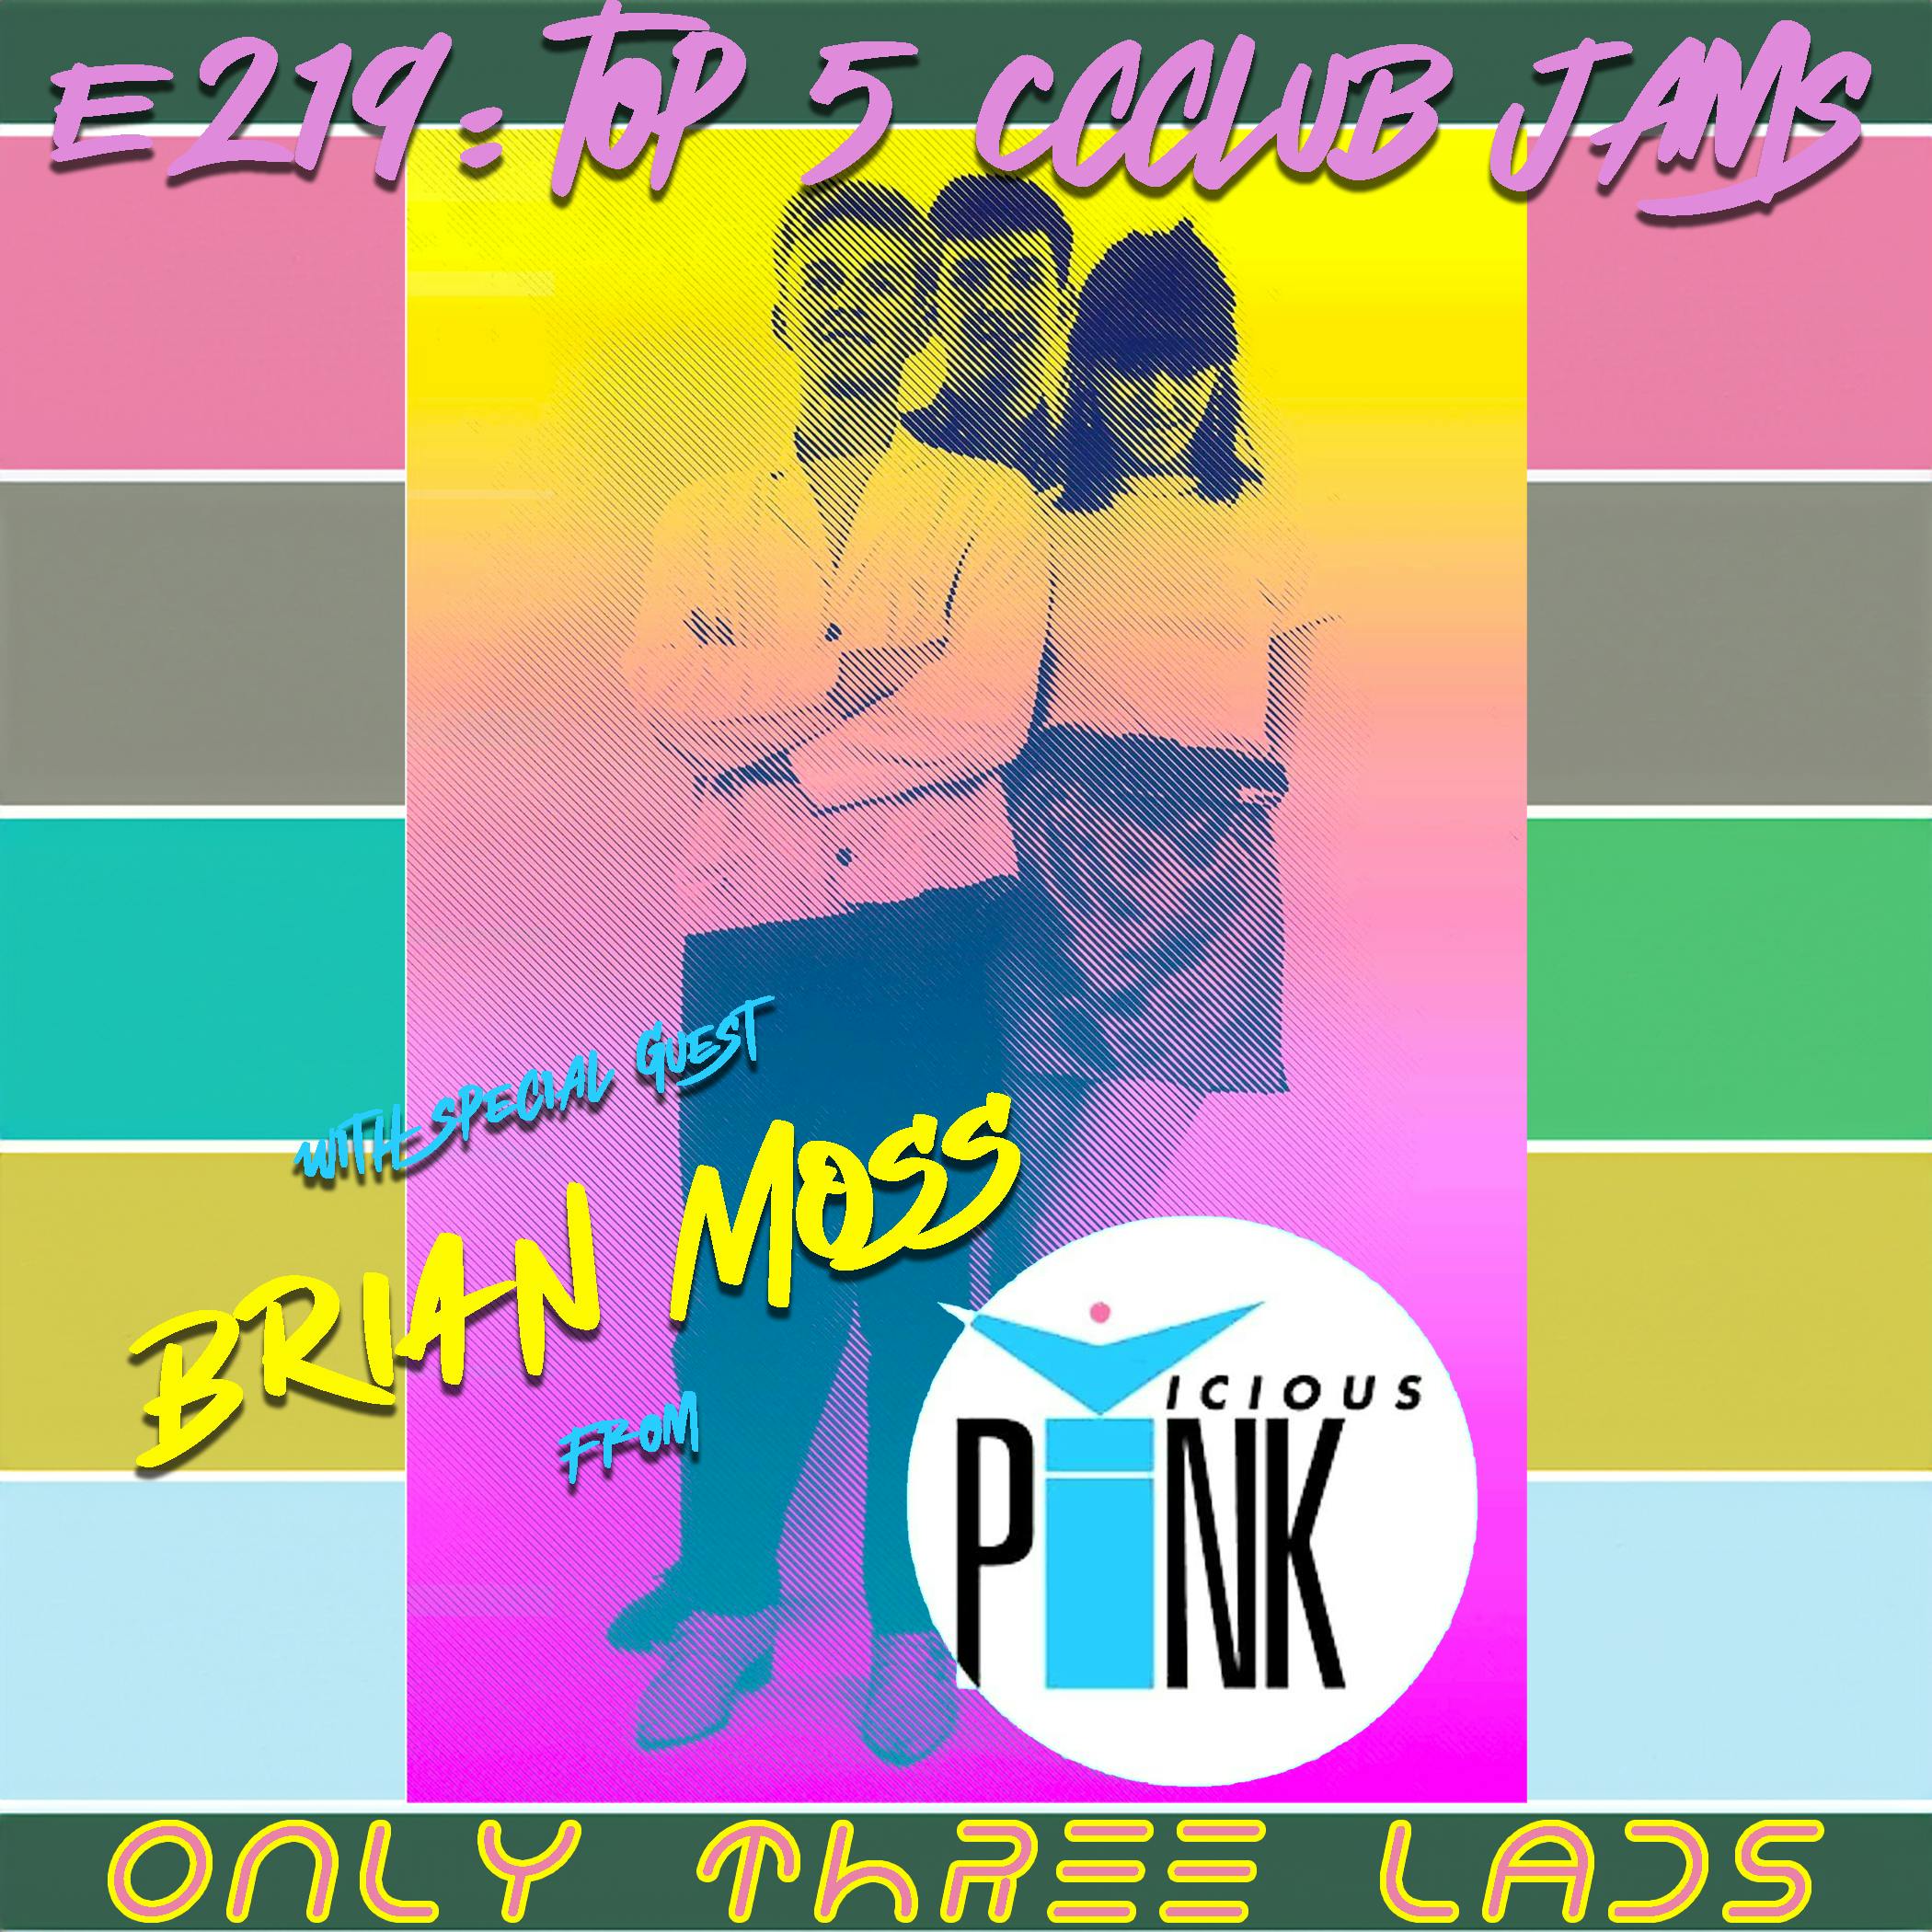 Only Three Lads: Brian Moss from Vicious Pink - Top 5 Club Jams